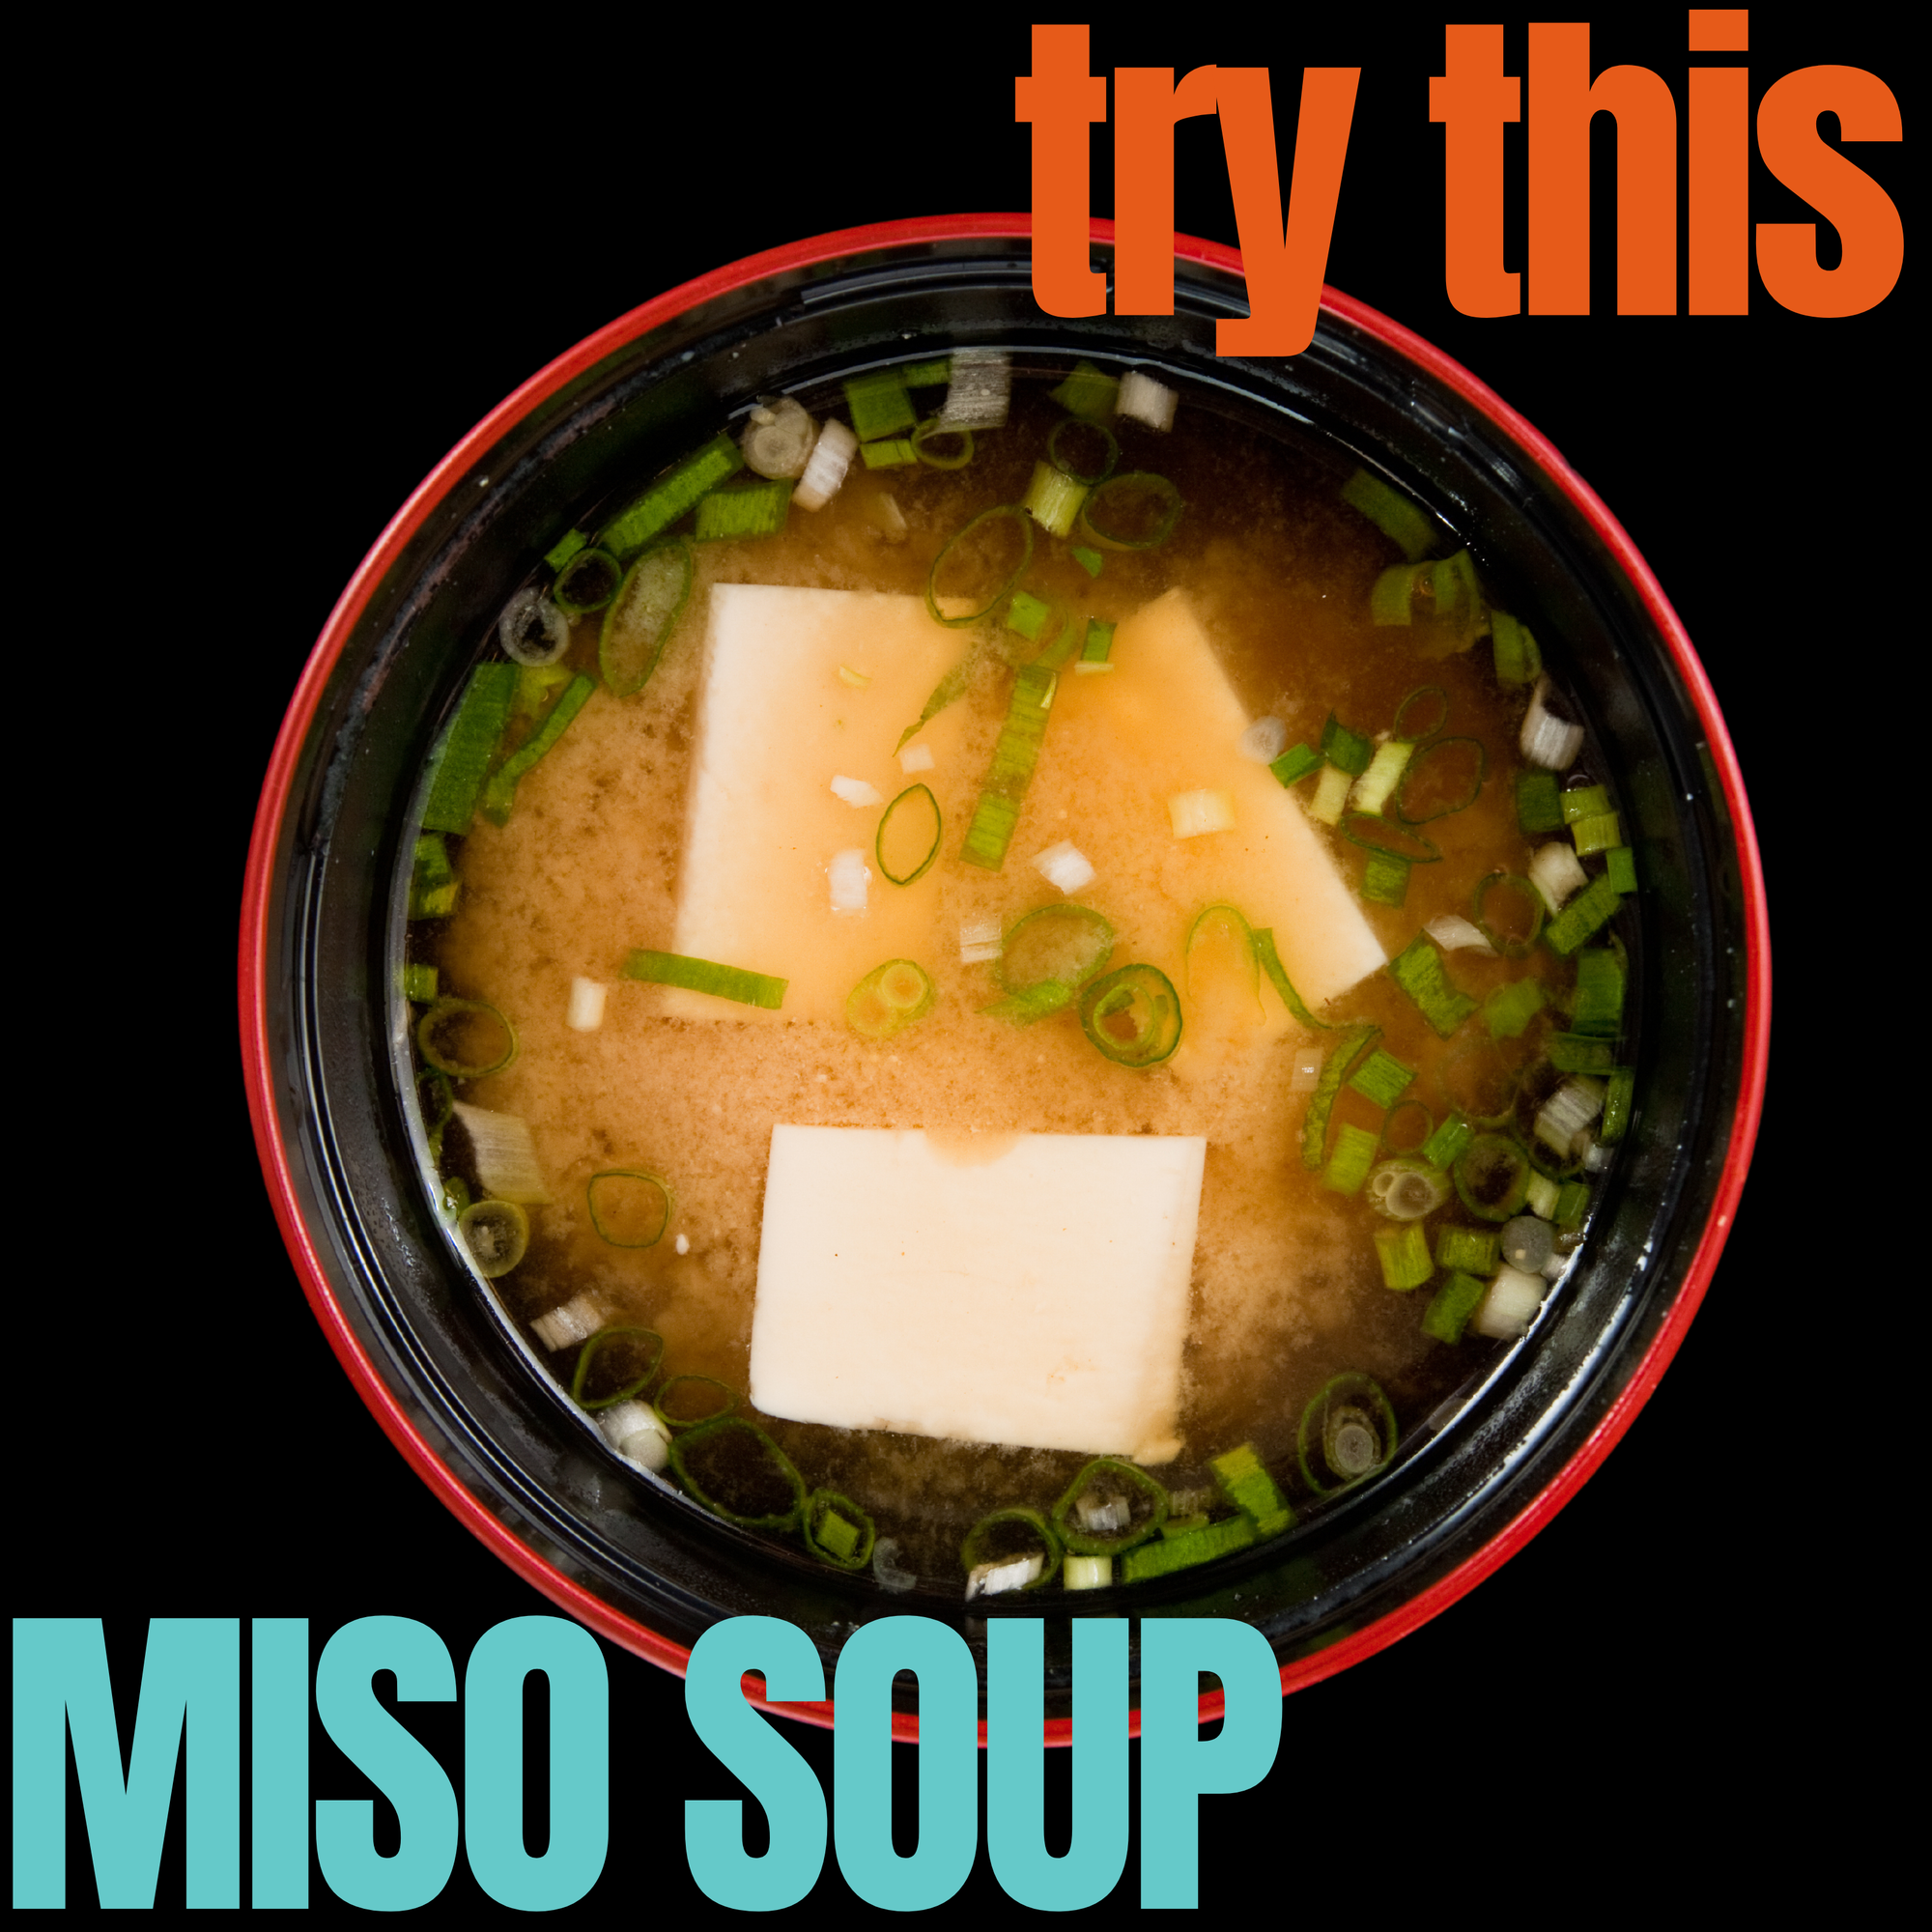 TRY THIS - MISO SOUP